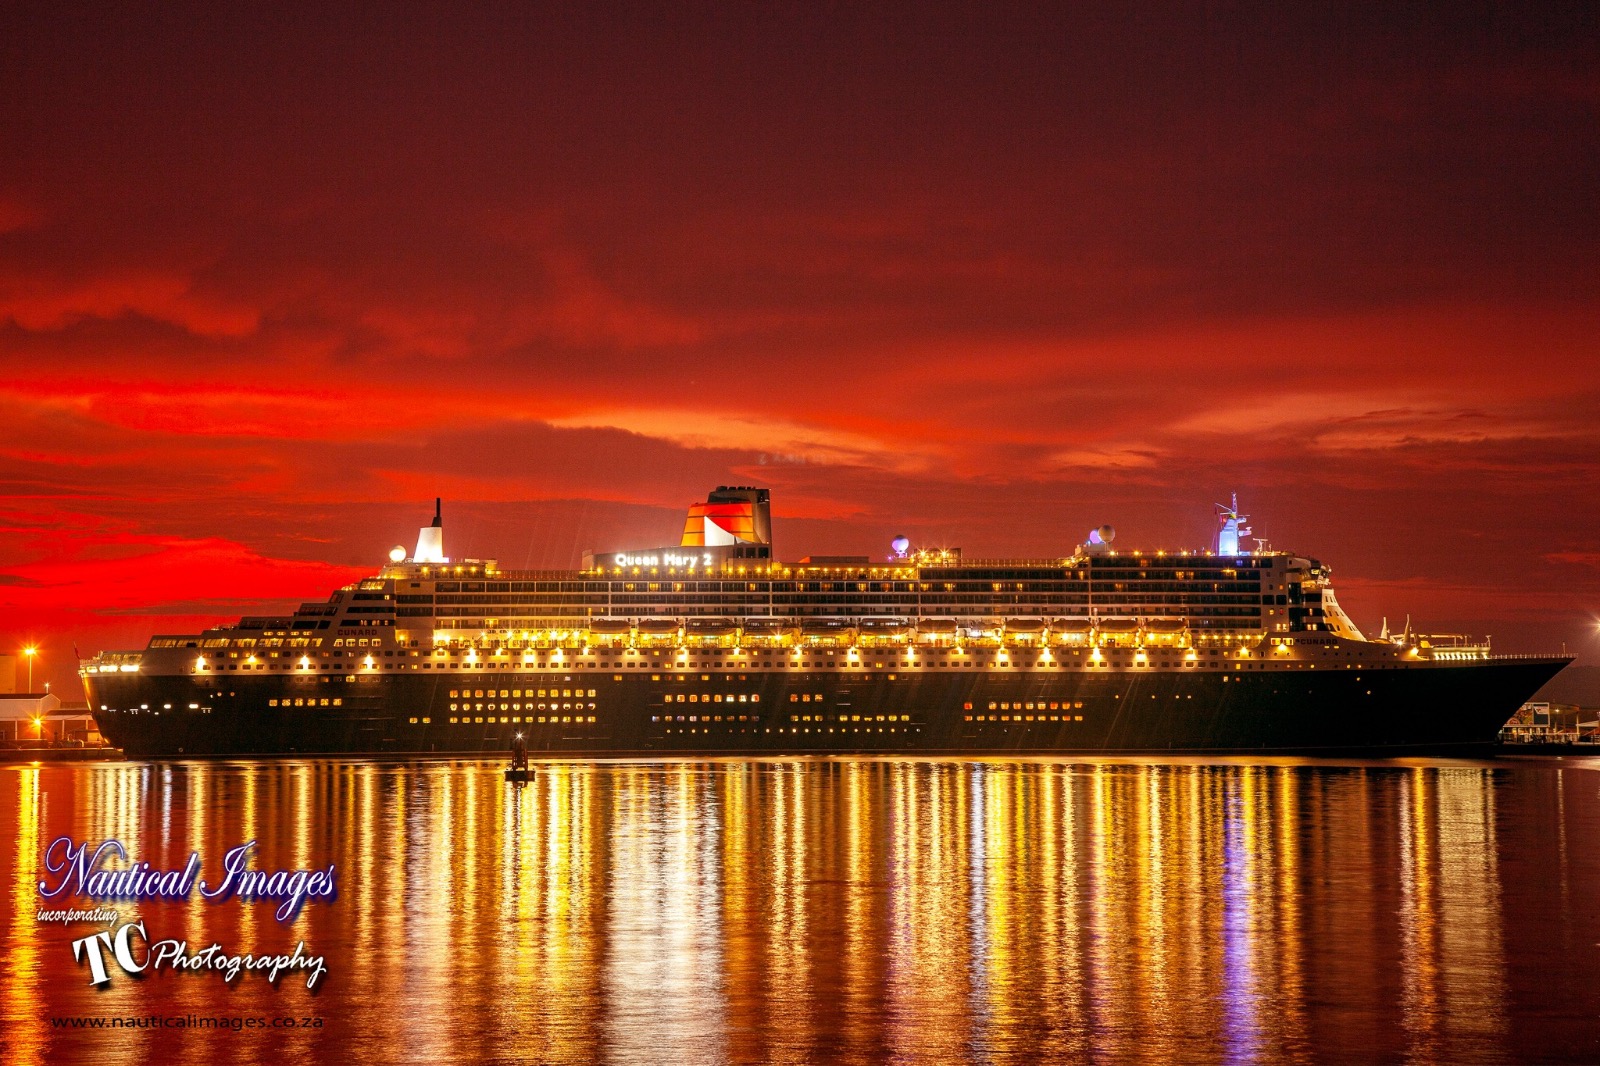 Queen Mary 2 in Durban. Nautical Images